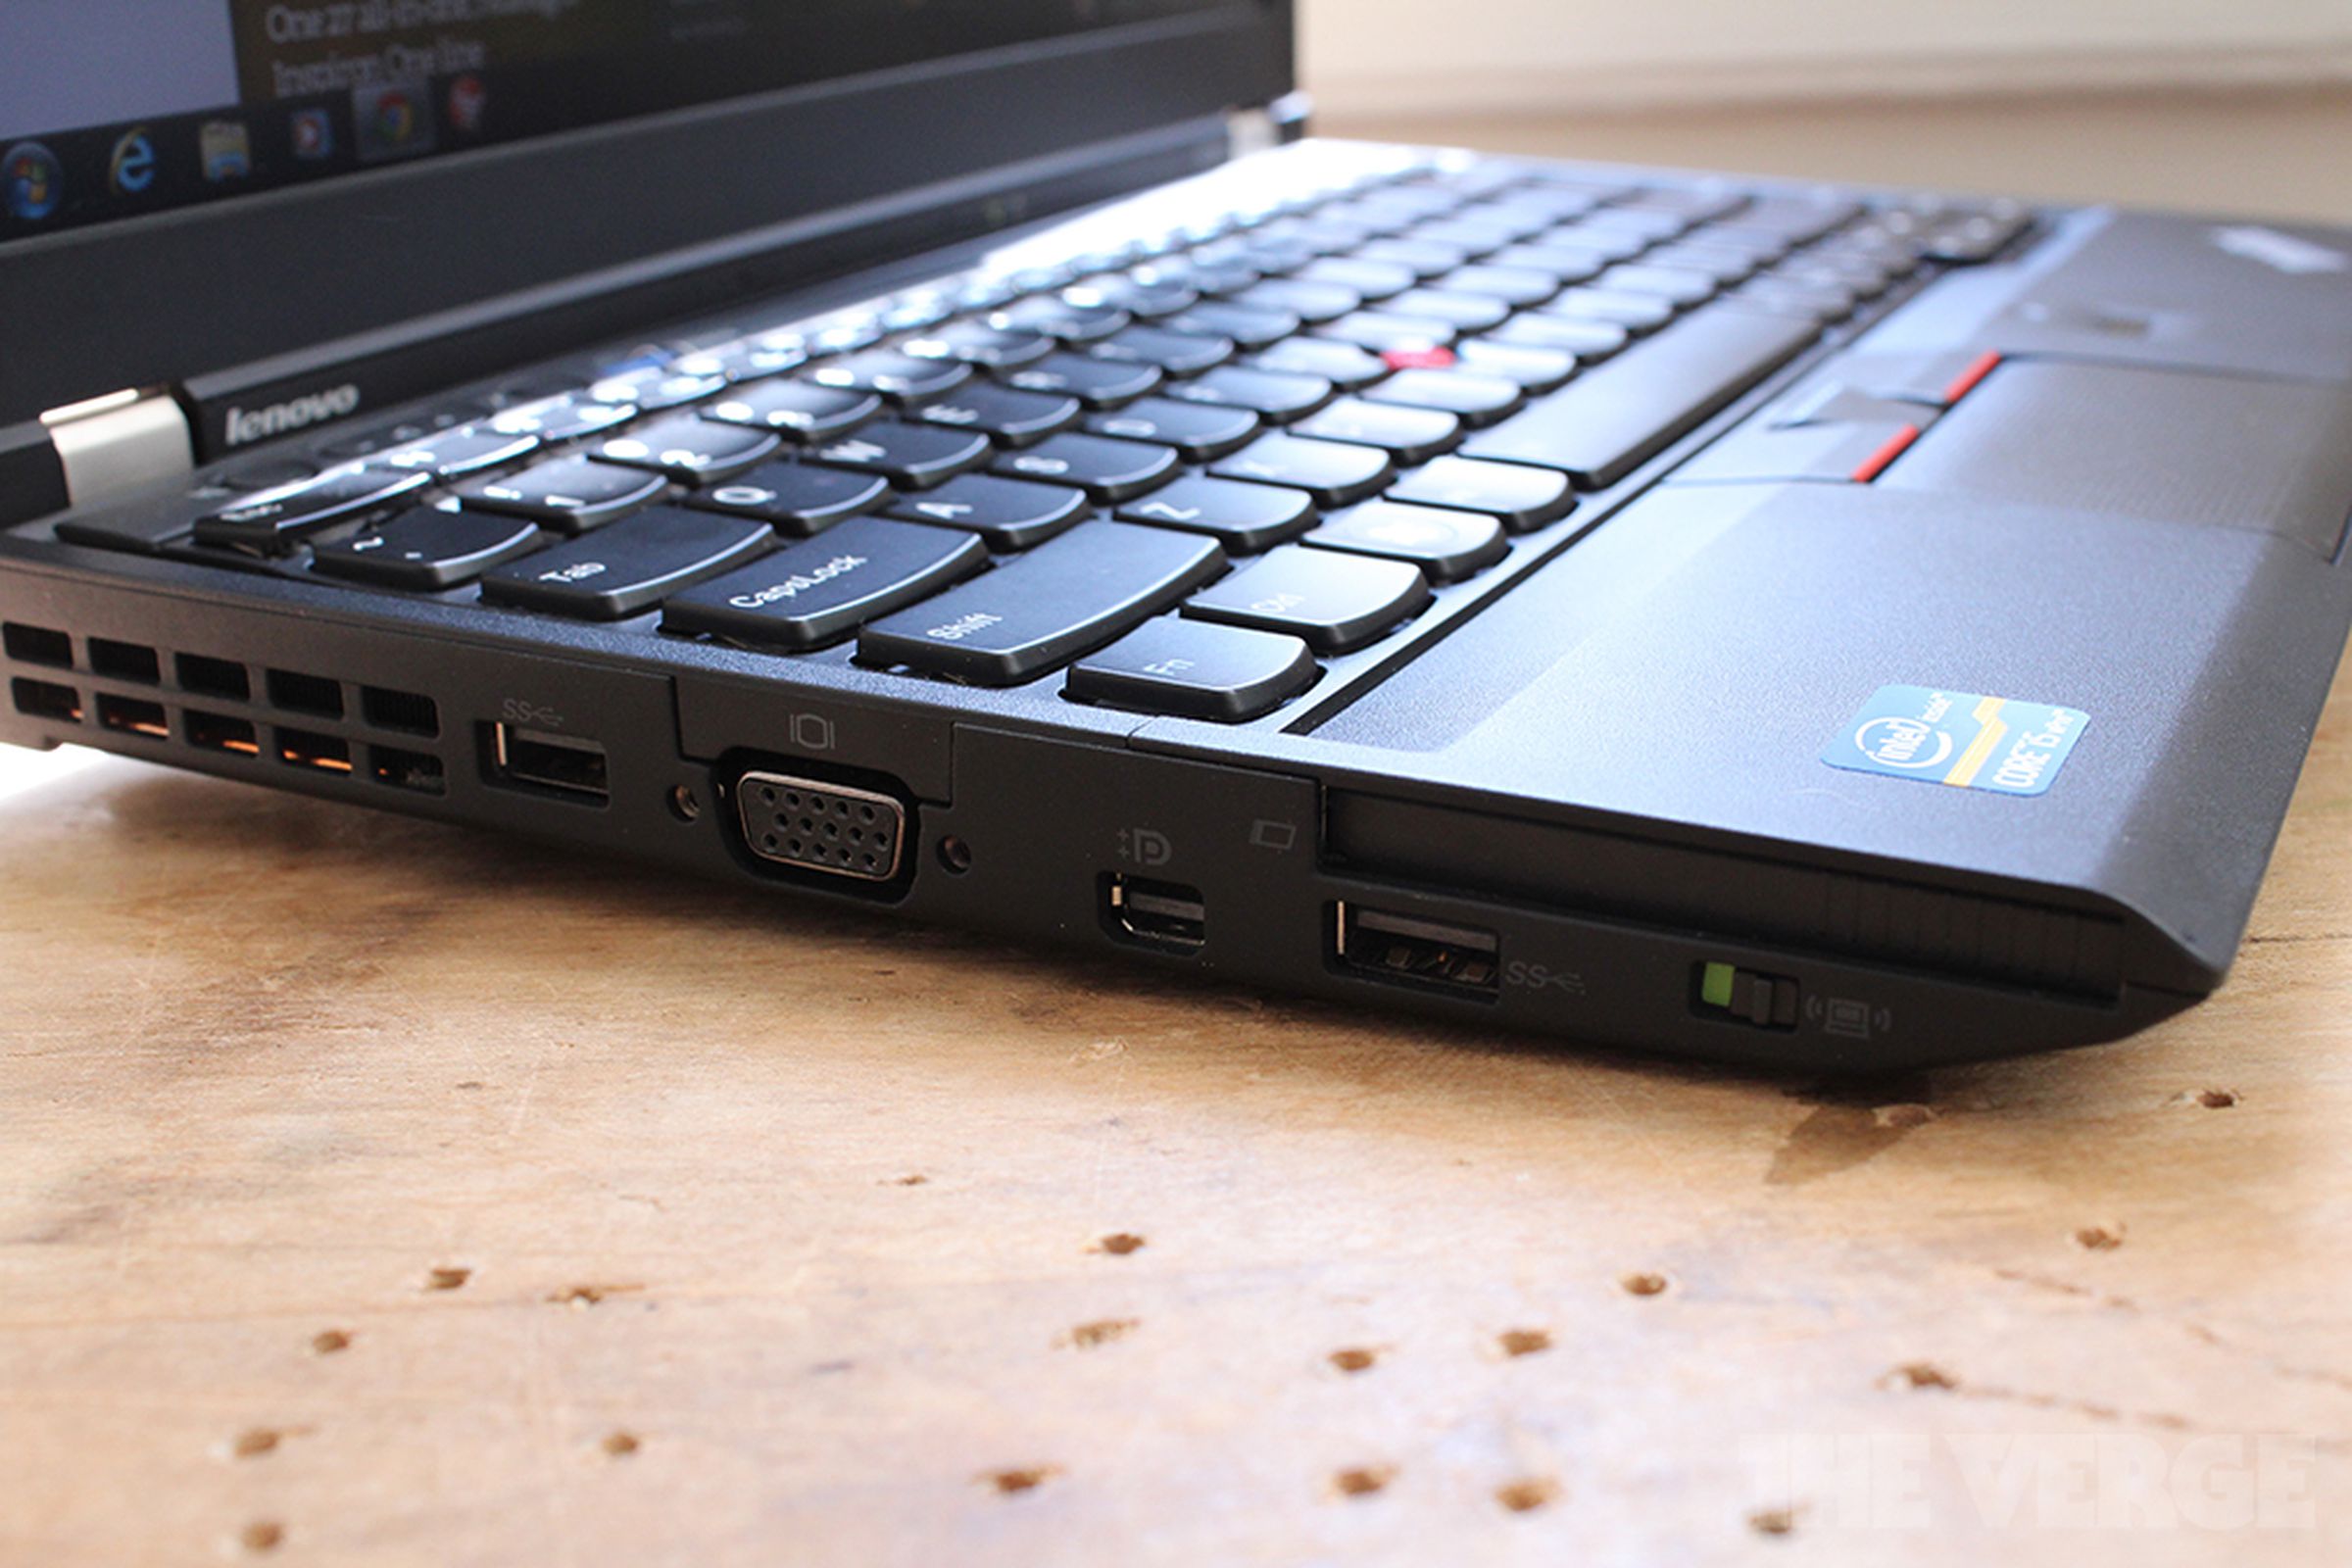 Gallery Photo: Lenovo ThinkPad X230 review pictures